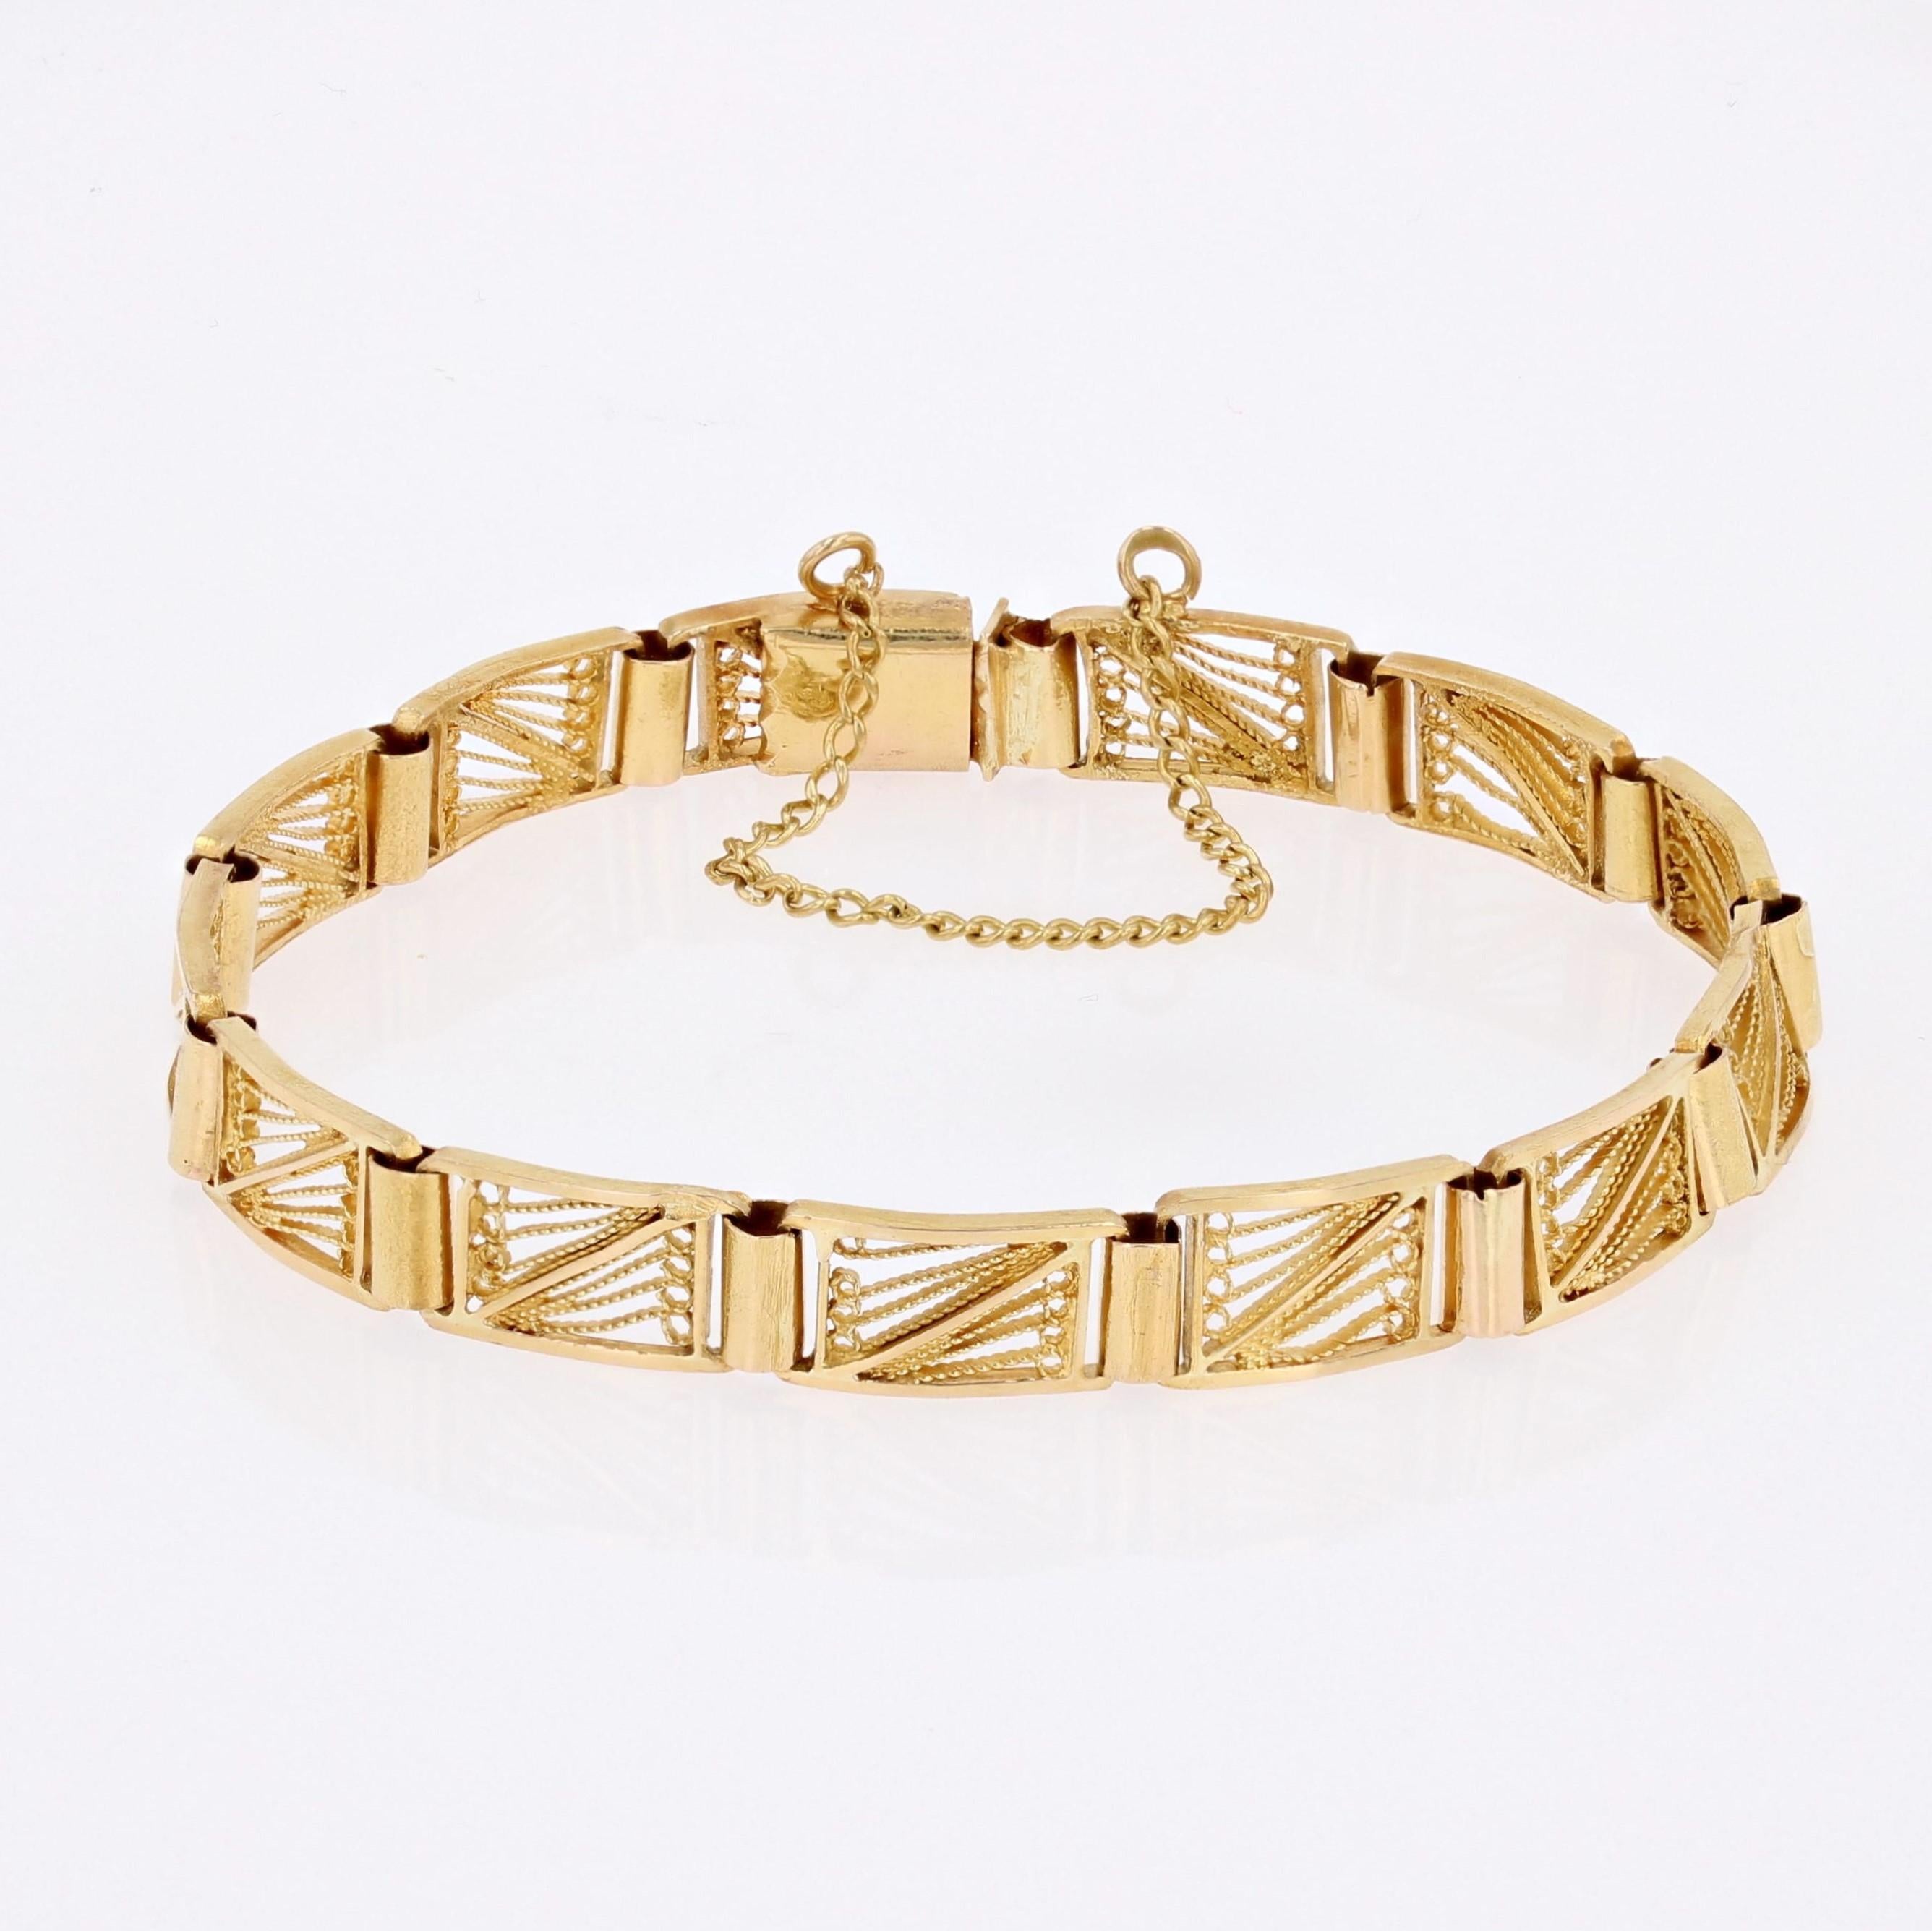 Bracelet in 18 karat yellow gold, gazelle head hallmark.
This yellow gold bracelet is composed of rectangular links filigree articulated between them. The ratchet clasp is hidden in a link and a safety chain accompanies it.
Internal circumference :